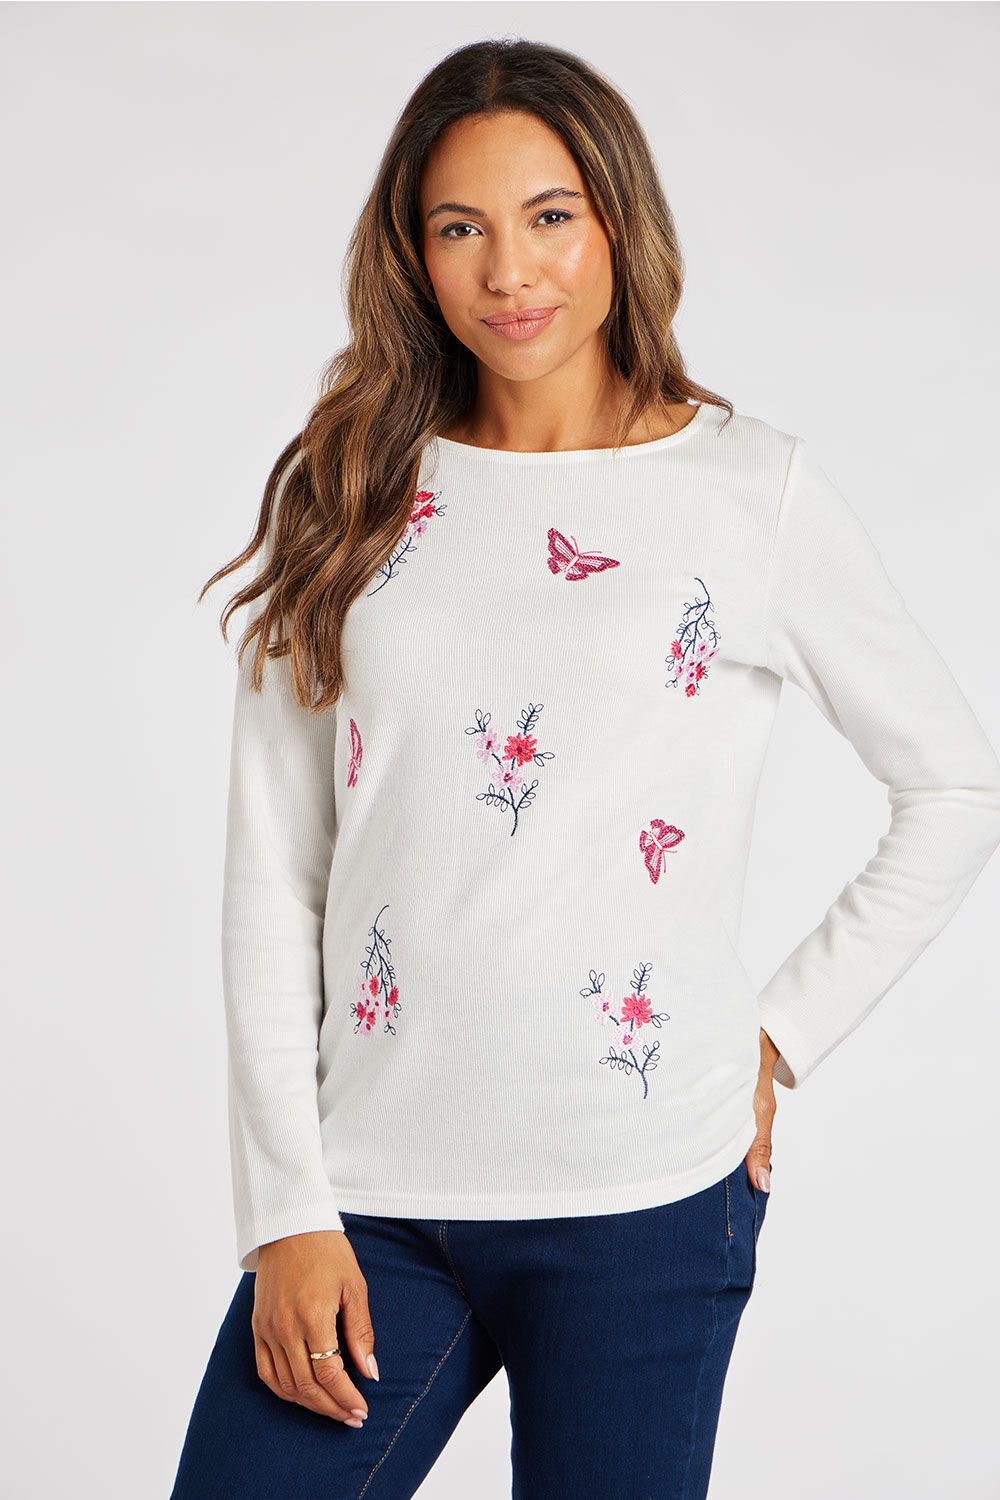 Bonmarche Ivory Long Sleeve Embroidered Sprig and Butterfly Top, Size: 12